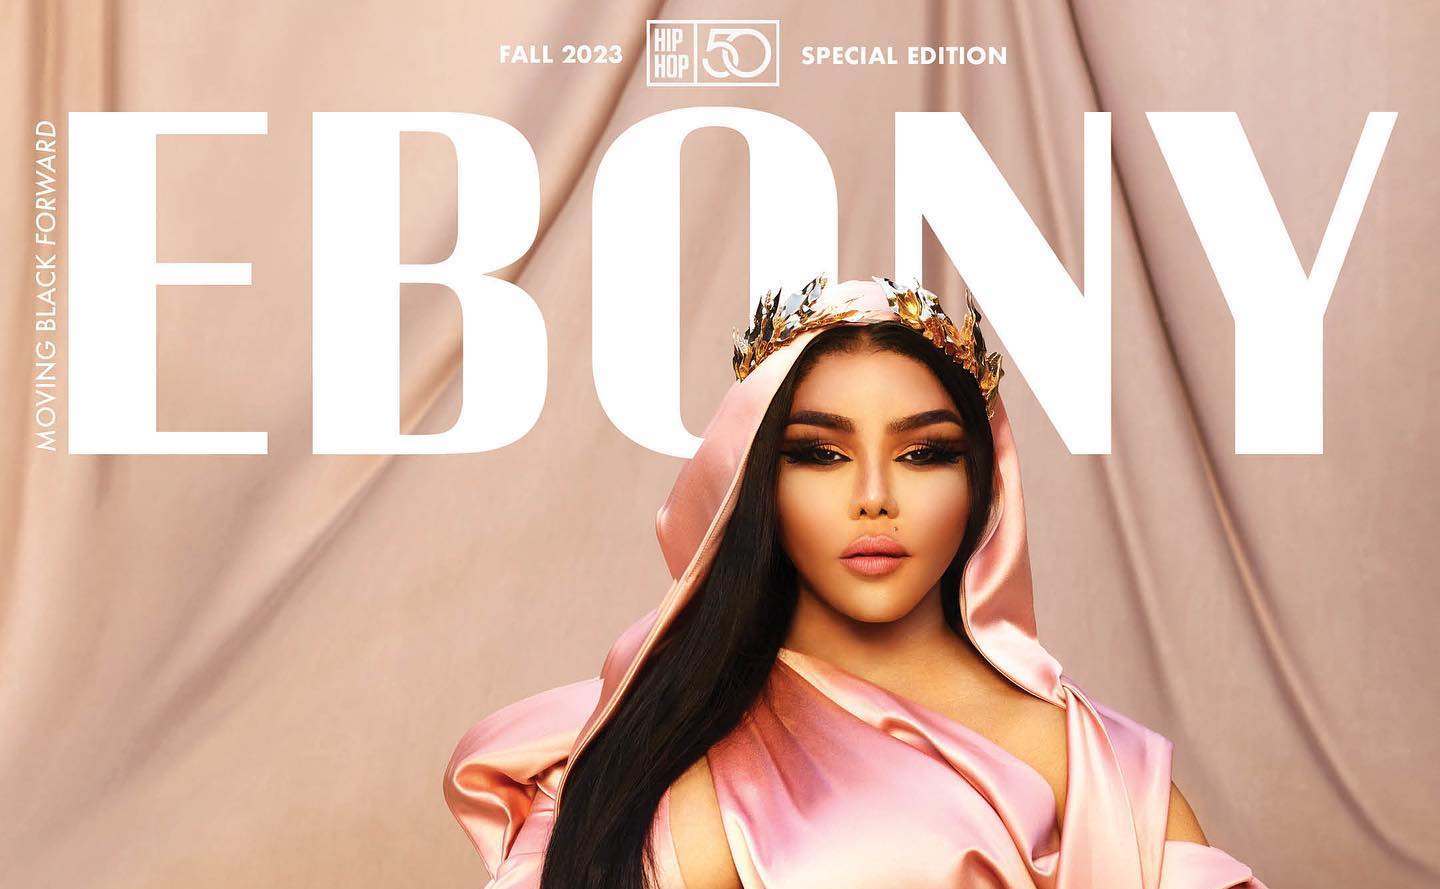 Lil Kim Covers Ebony / Photographer Responds to Fan Confusion That